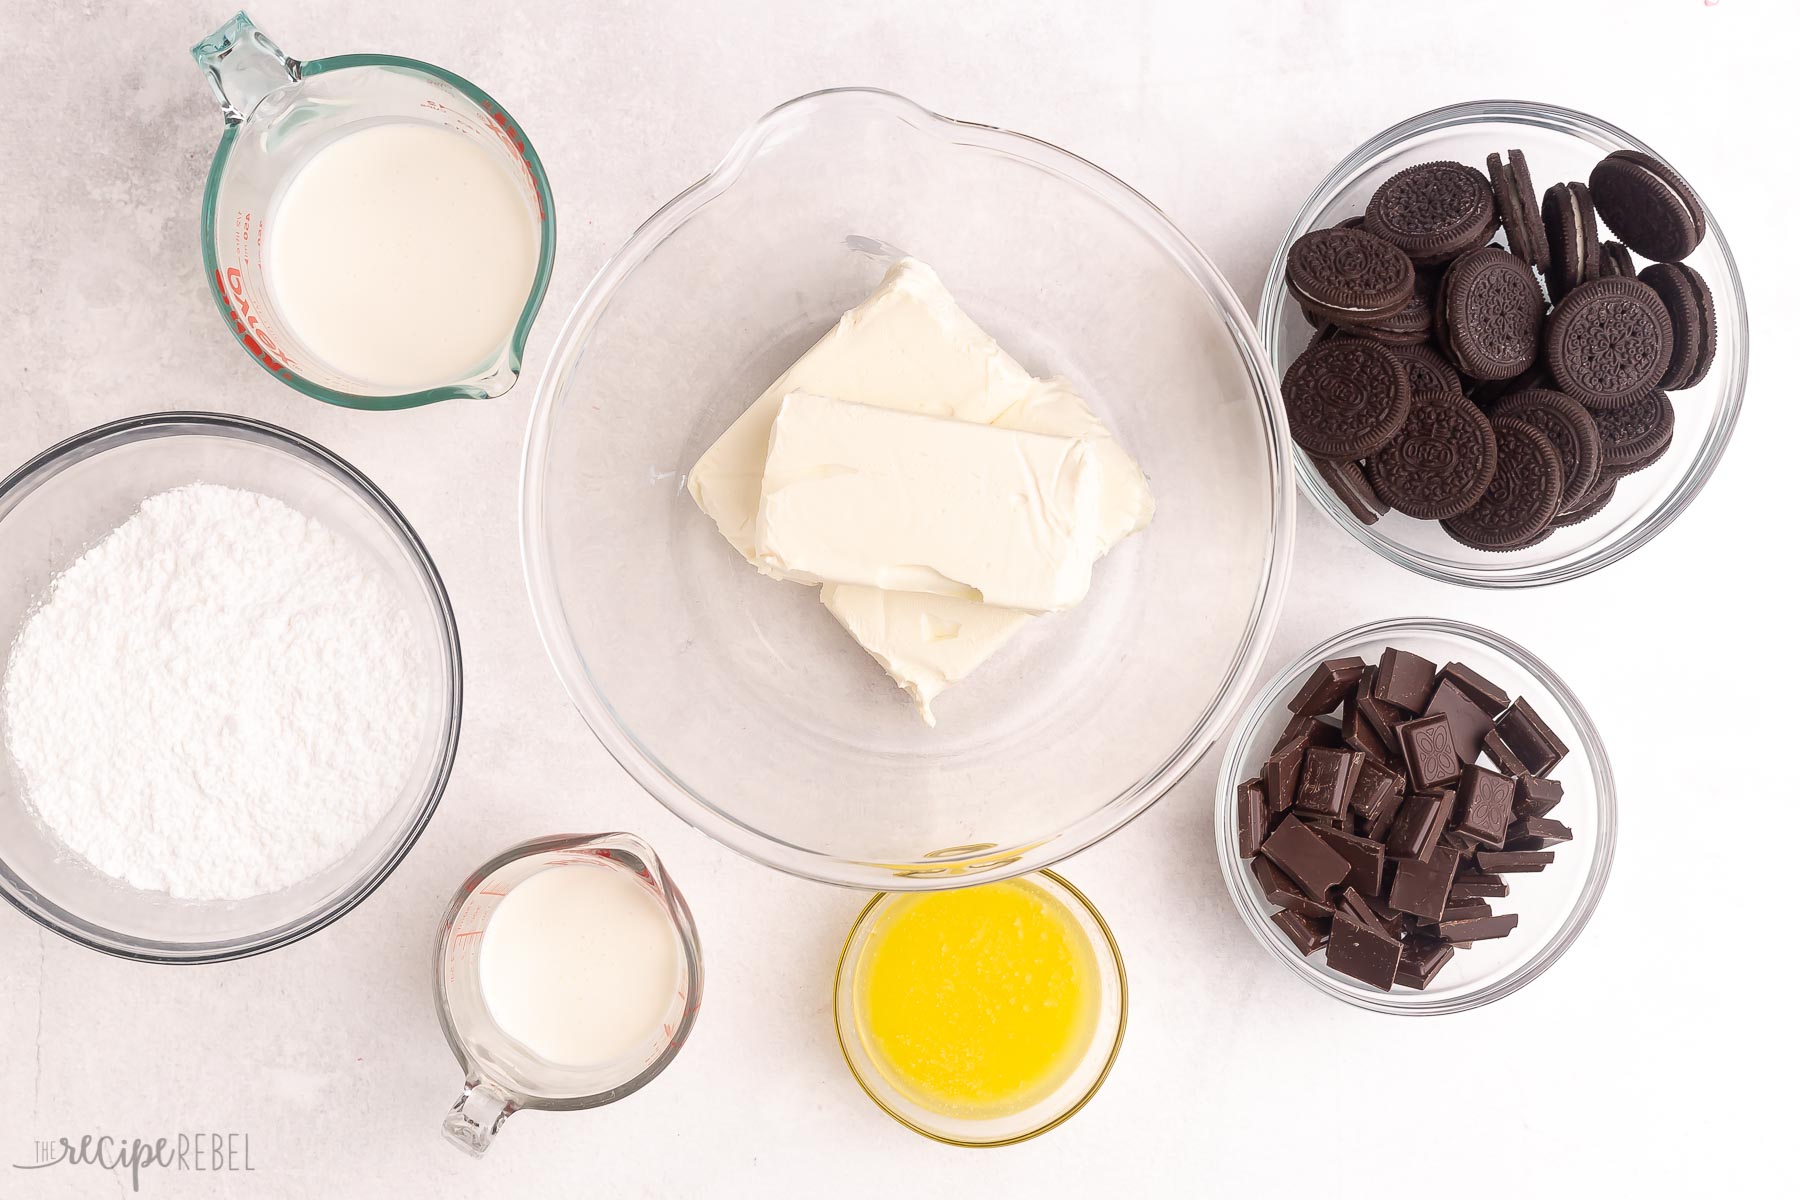 ingredients needed for no bake chocolate cheesecake.